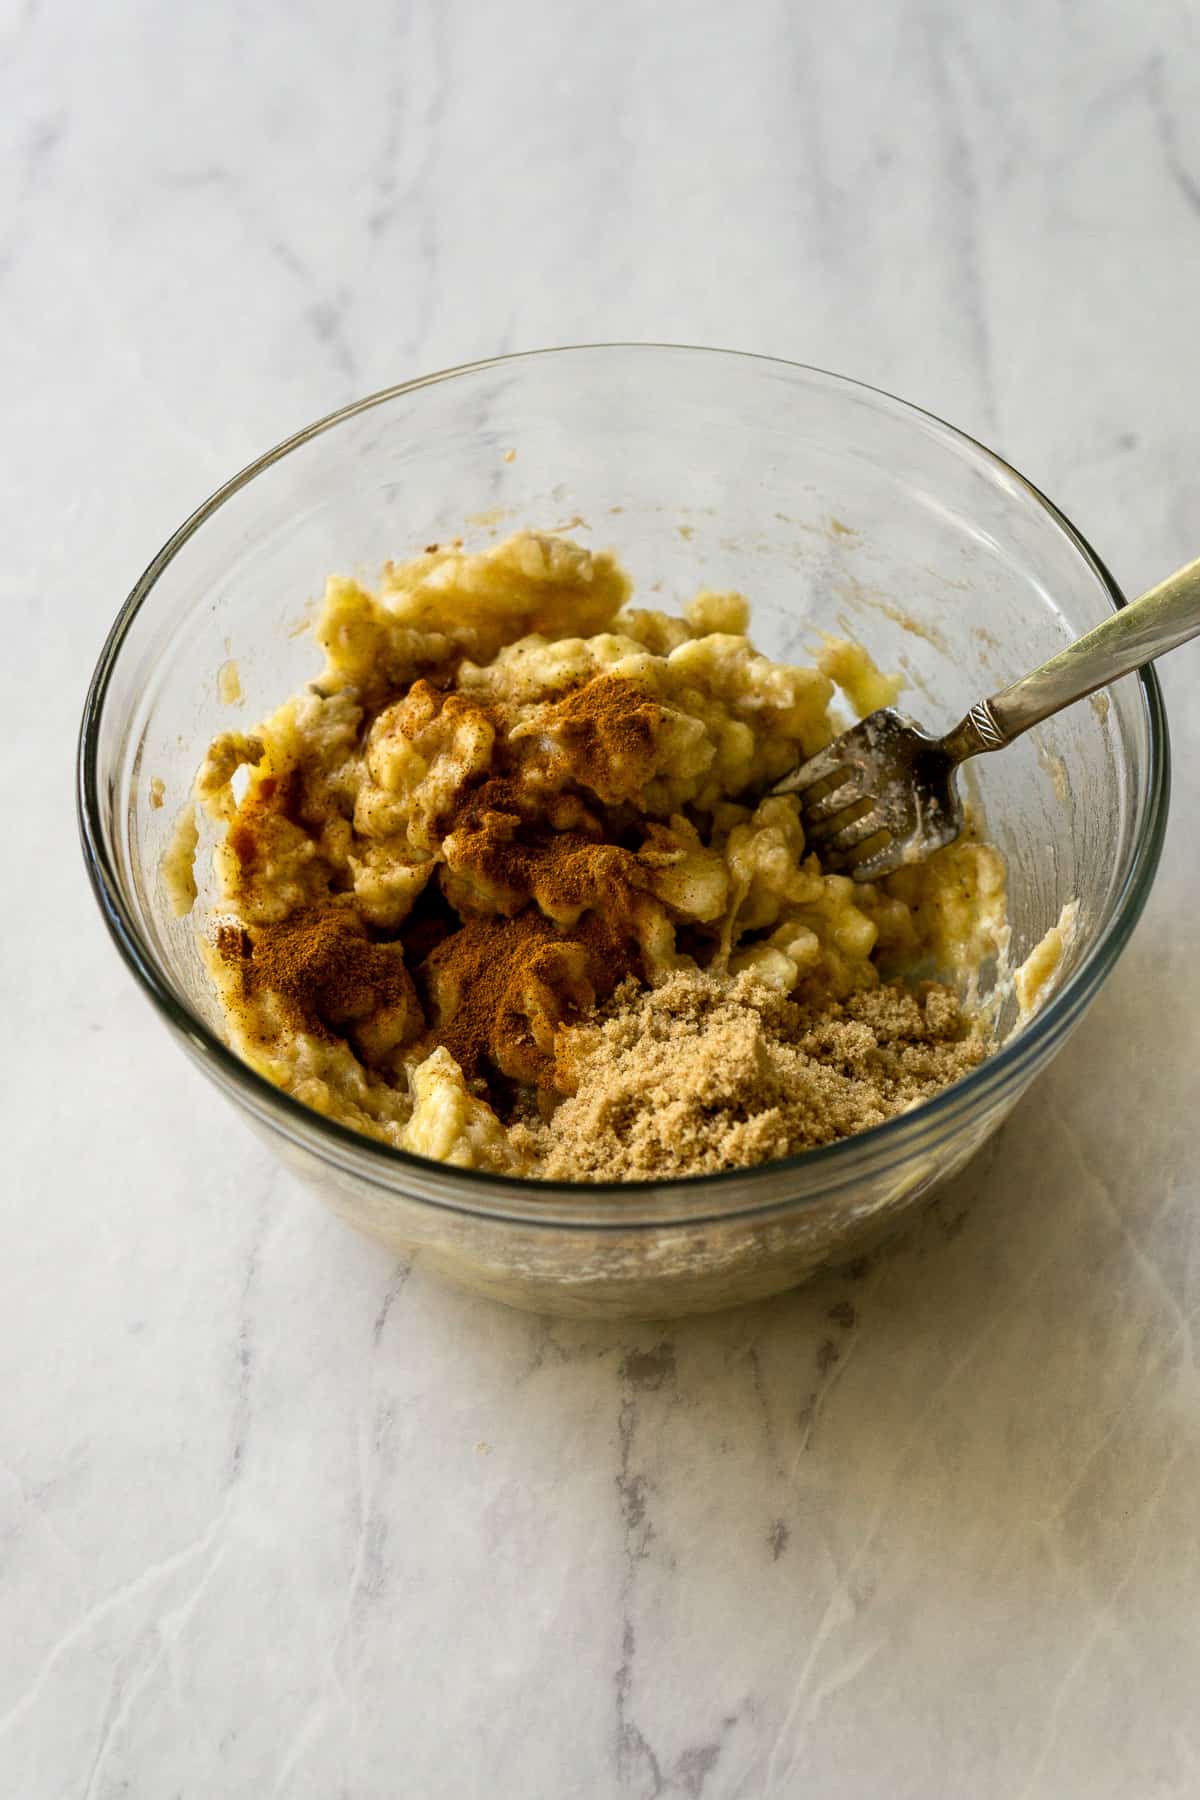 The bananas, brown sugar, and cinnamon being mashed together with a fork in a glass bowl. 